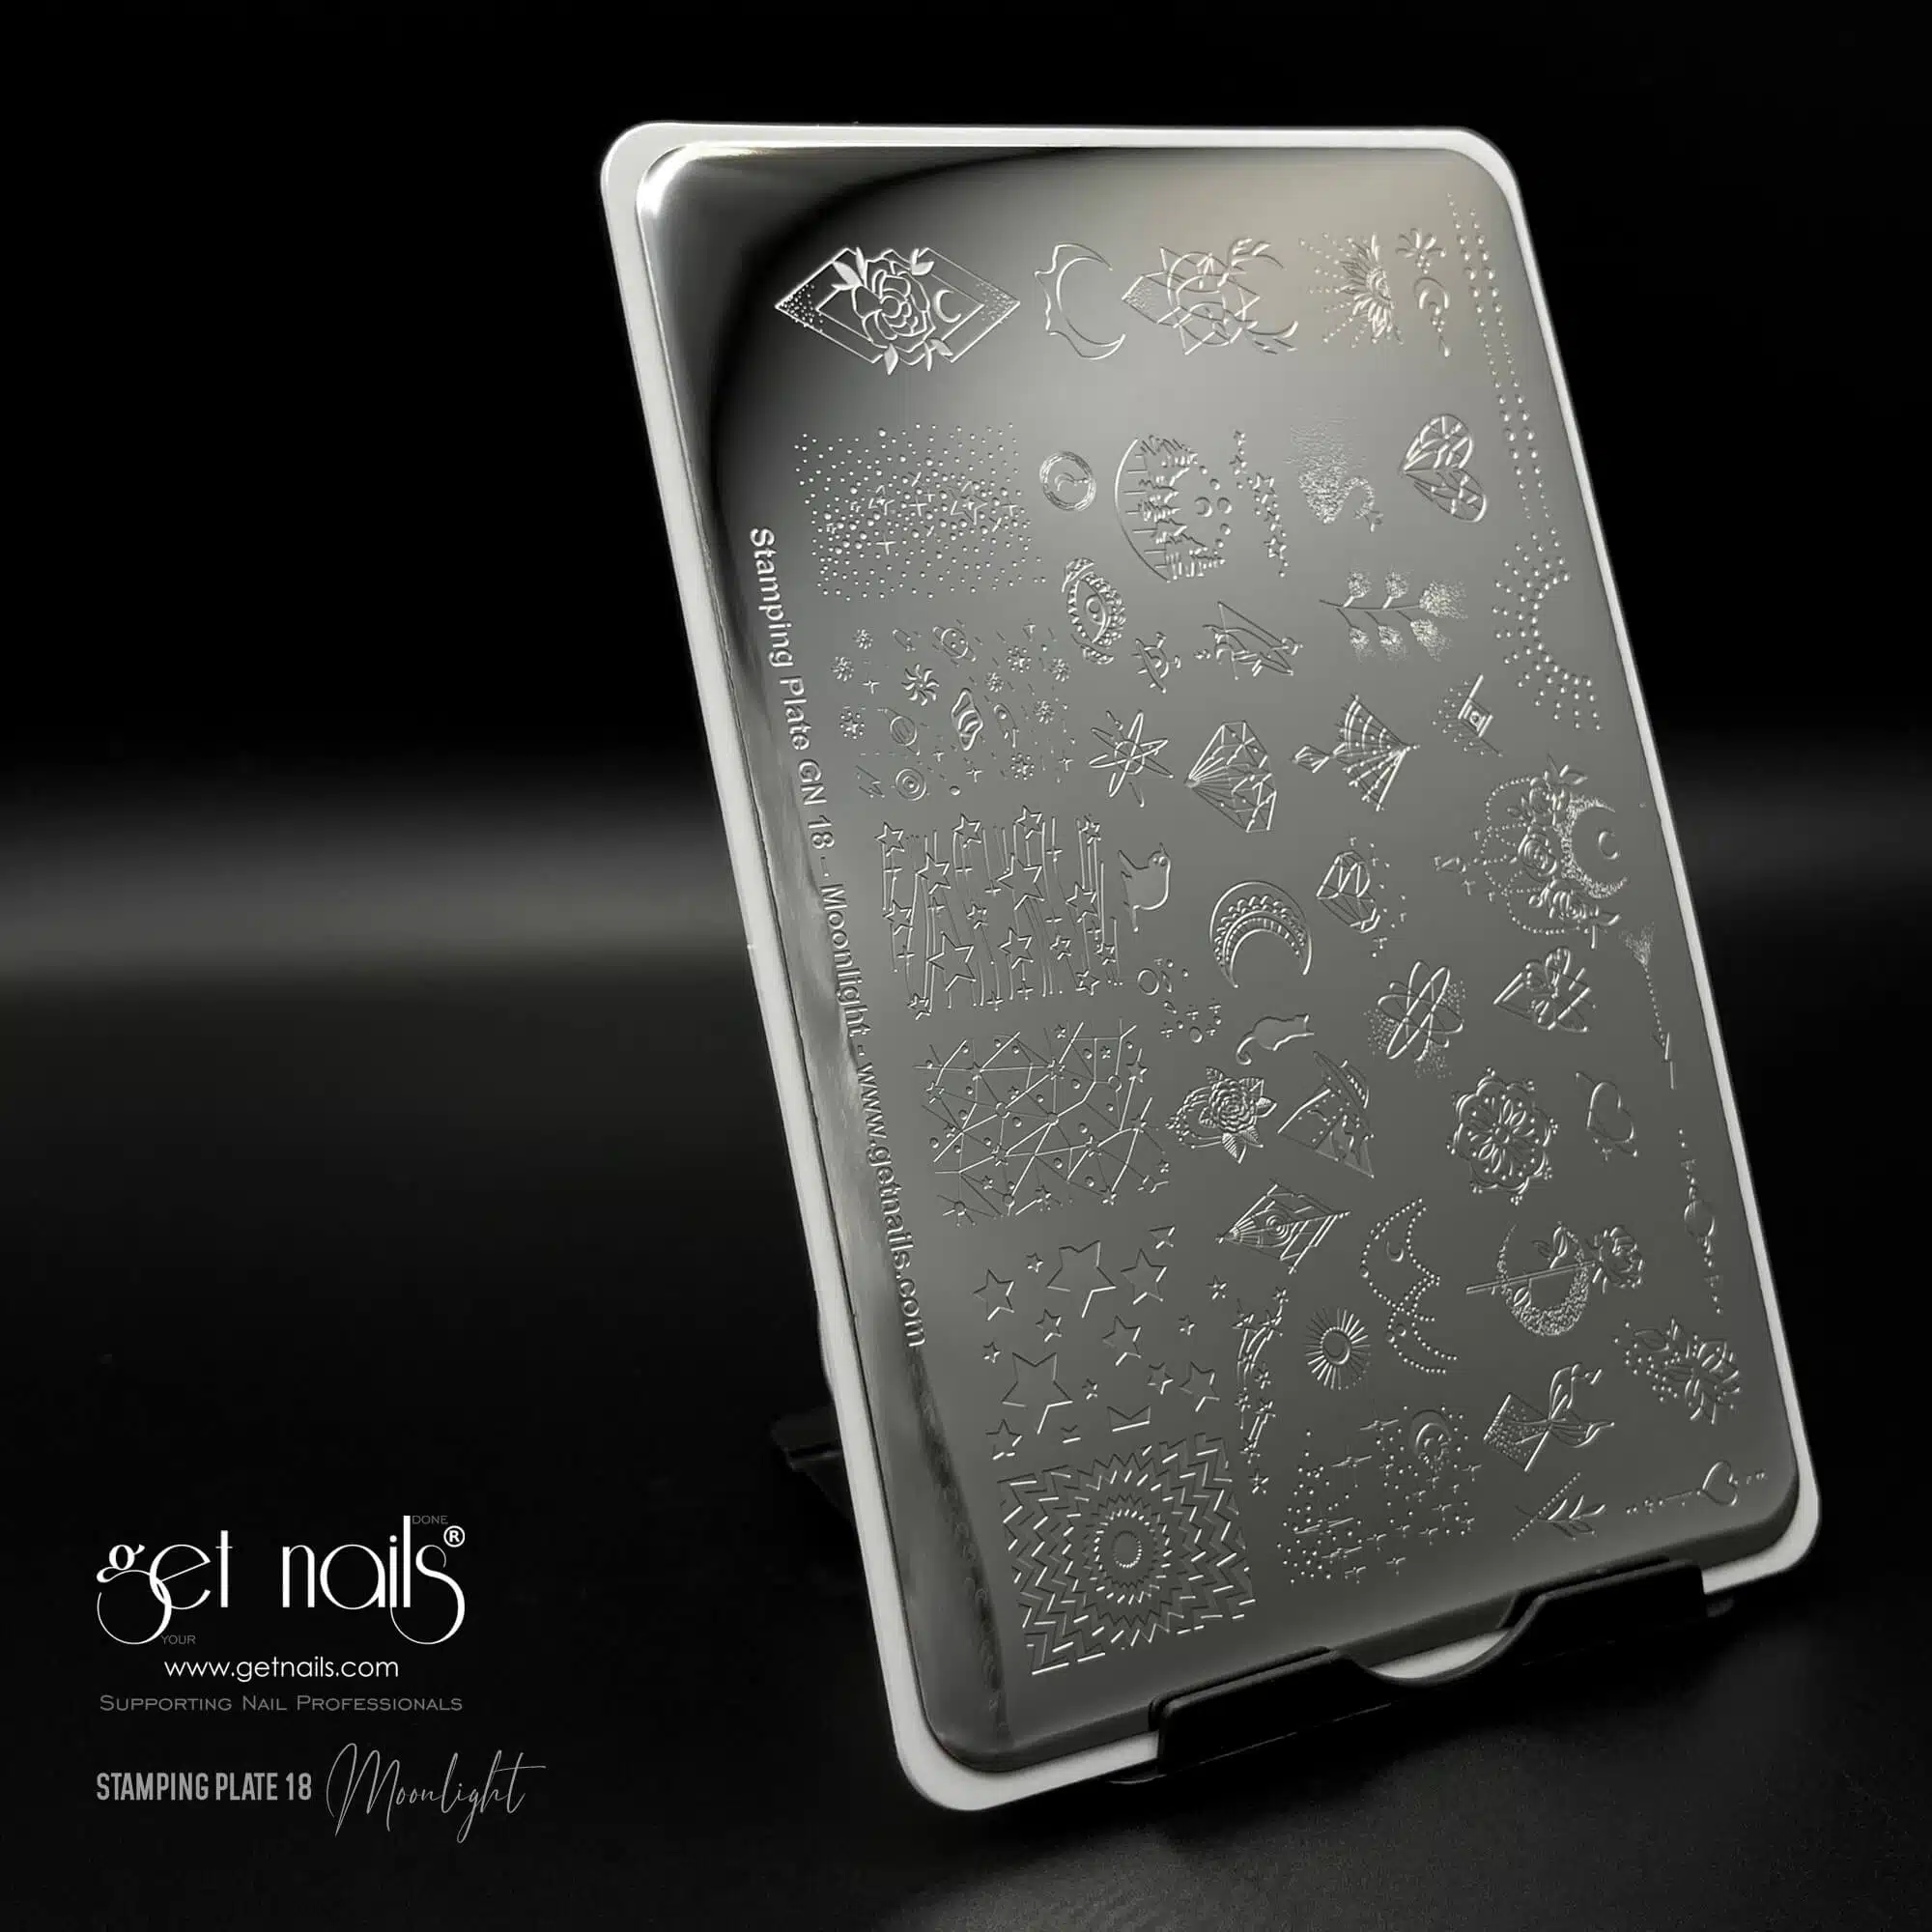 Get Nails Austria - Stamping Template 18 - Moonlight